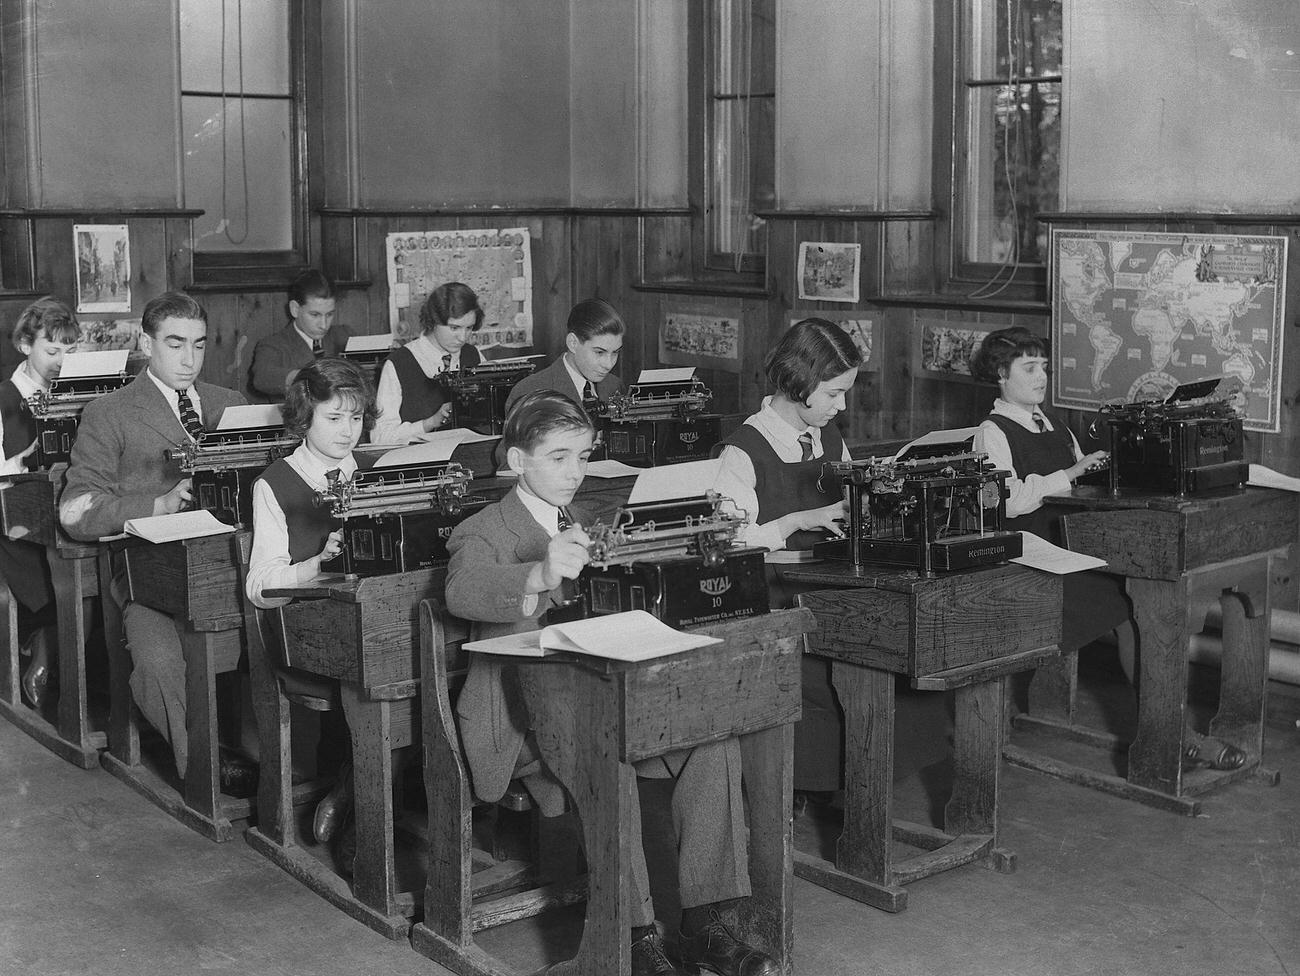 Students practicing typing in a class in Slough.